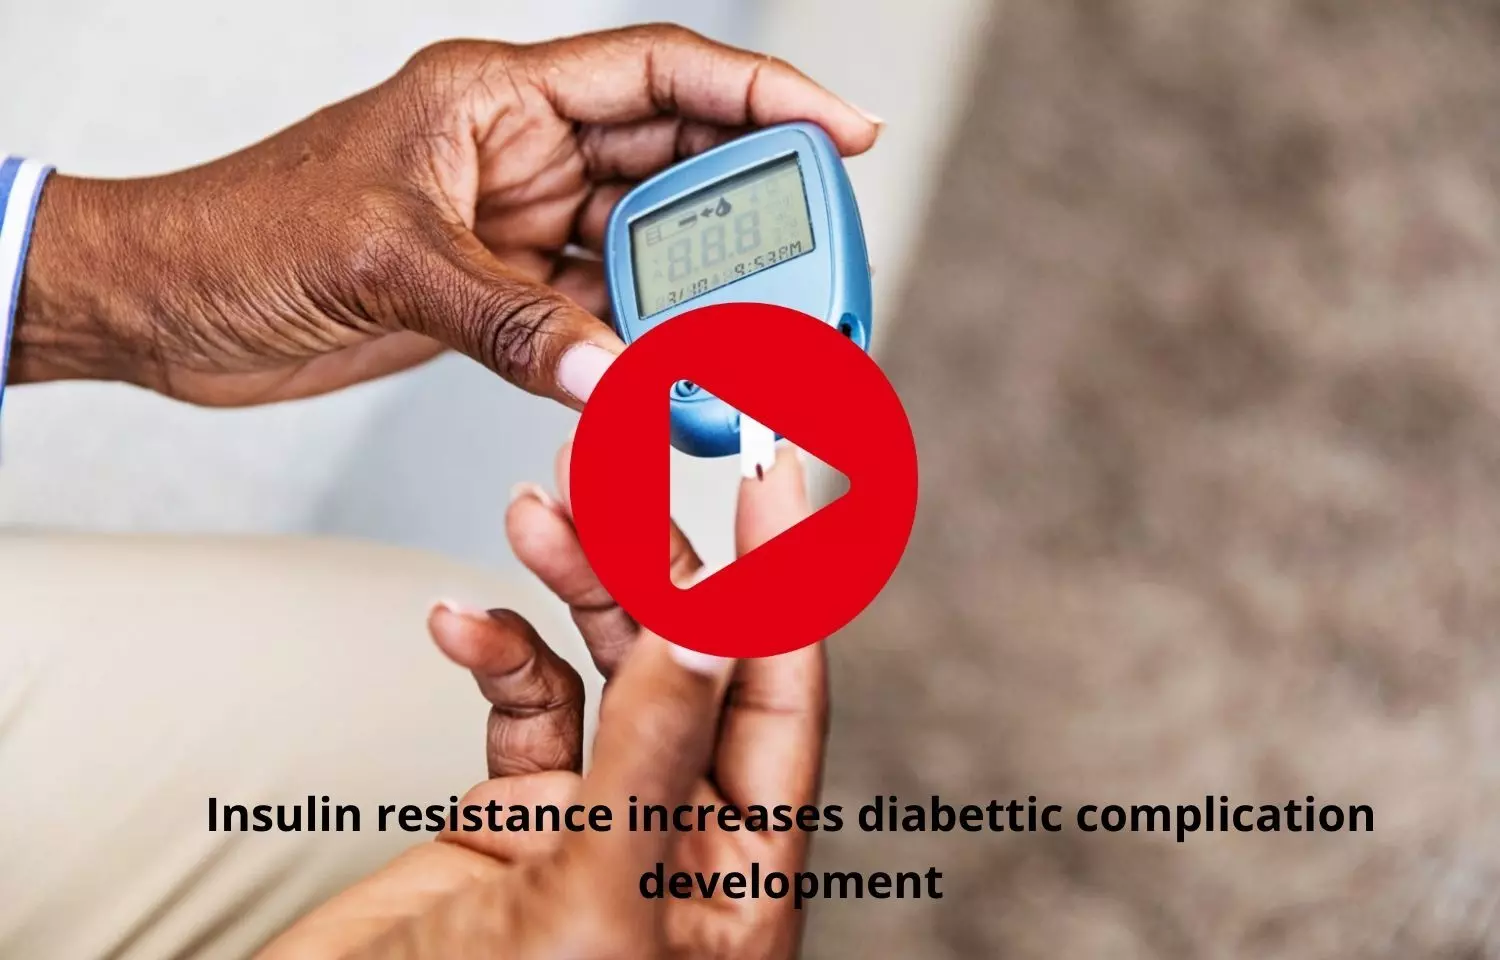 Insulin resistance risk factor for diabetic complications